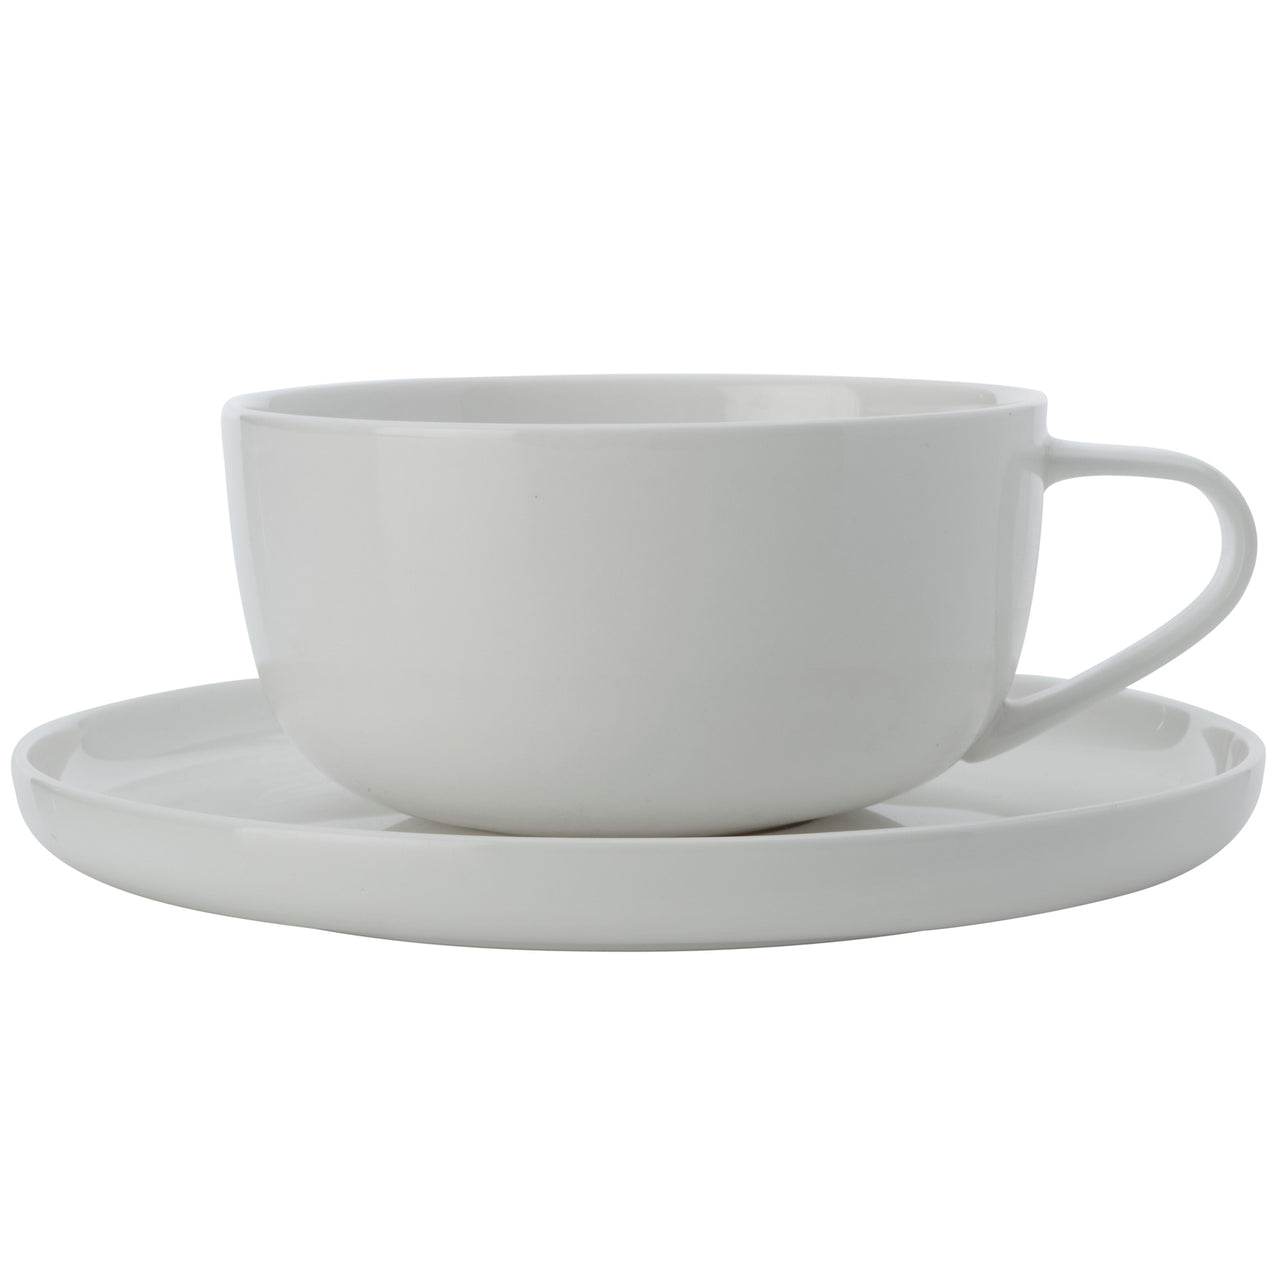 Cashmere High Rim 300ml Cups & Saucers (Set of 4)